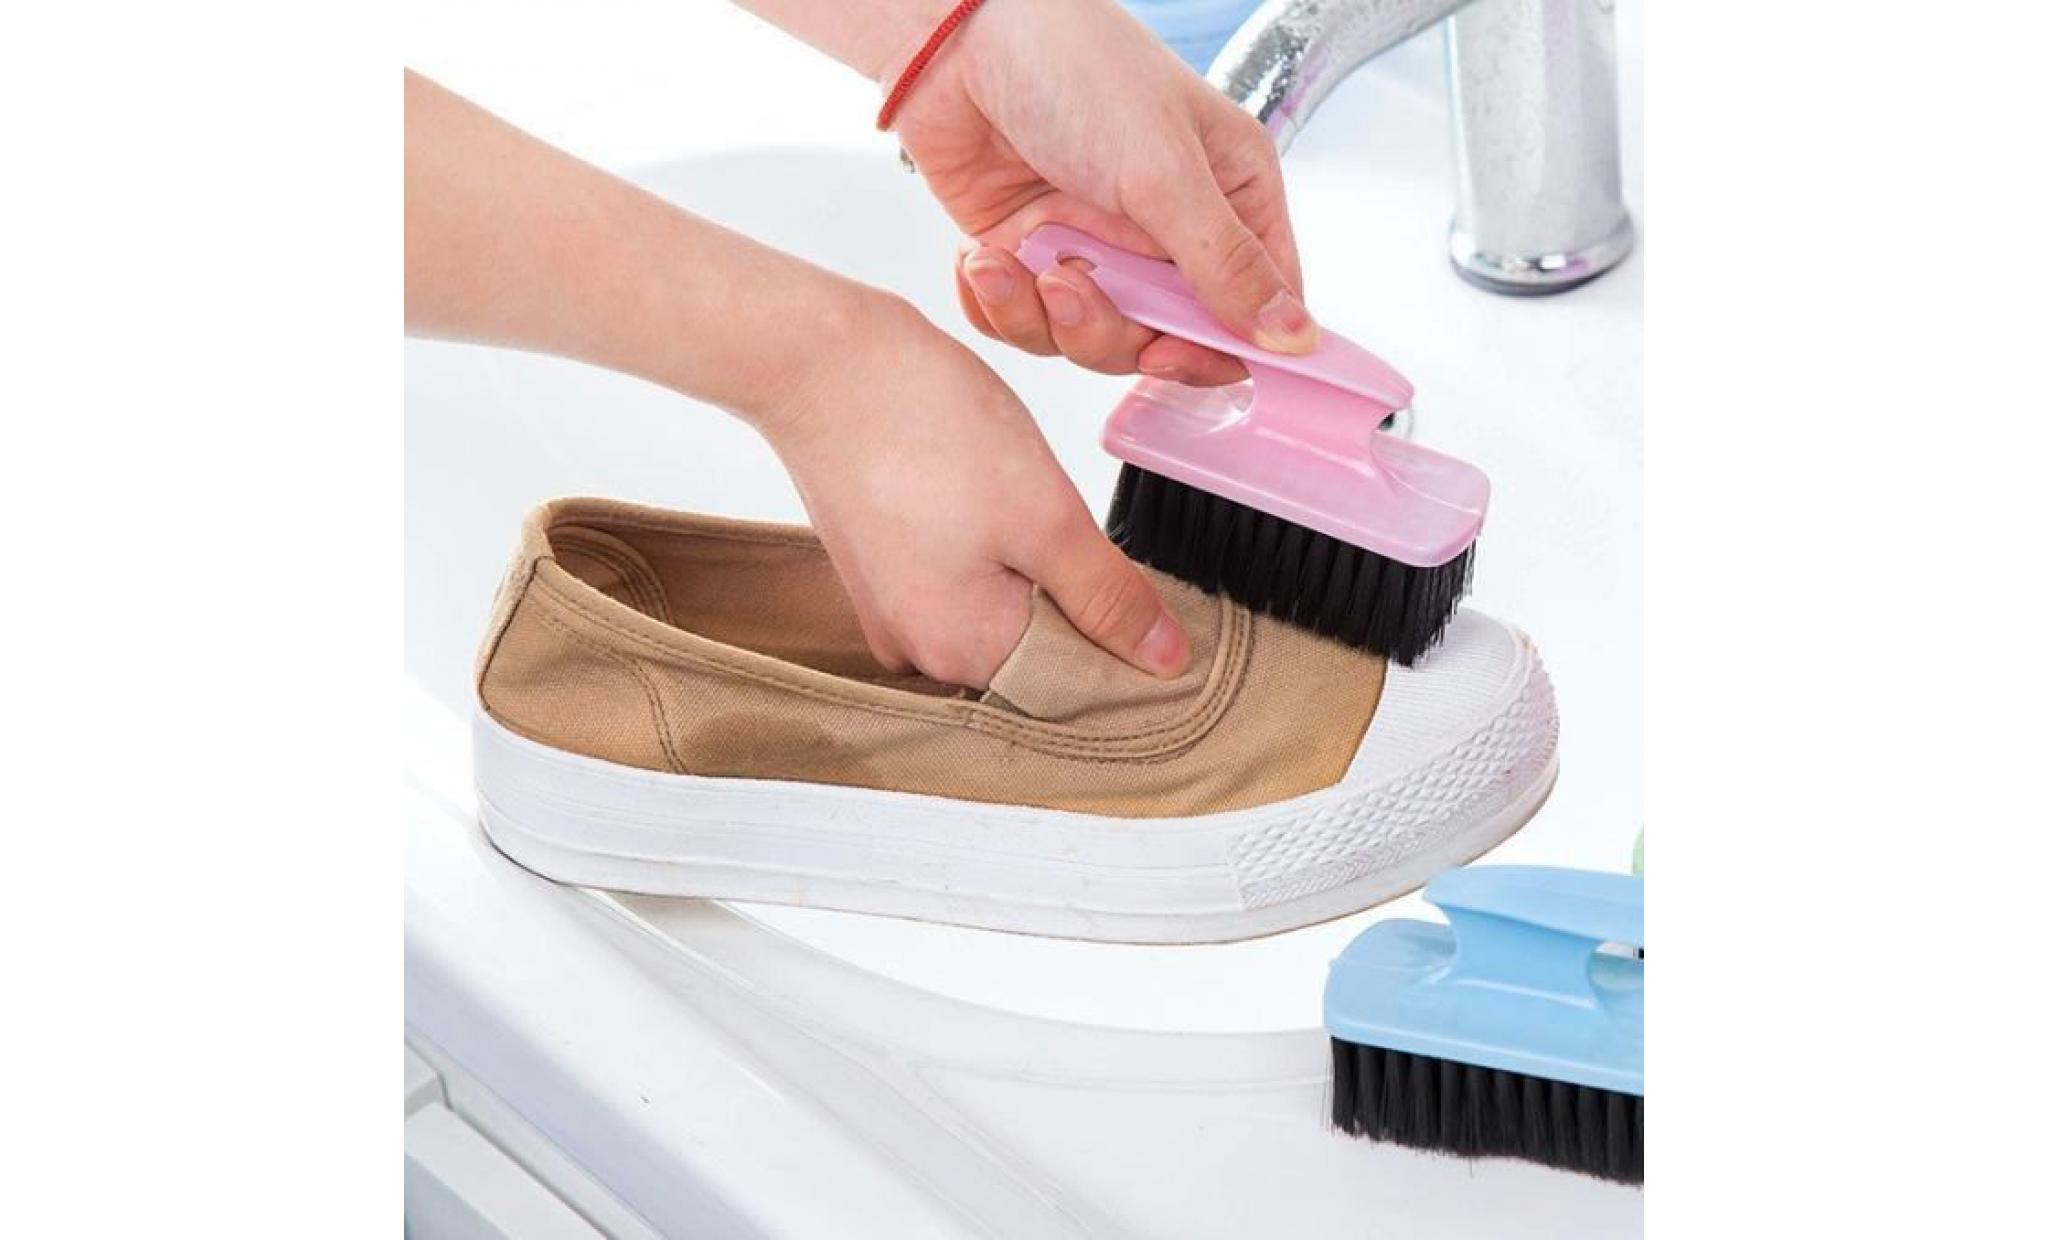 yjl60728763 cuisine wash lavage outil bol palm brosse chaussures scrubber cleaner nettoyage pas cher